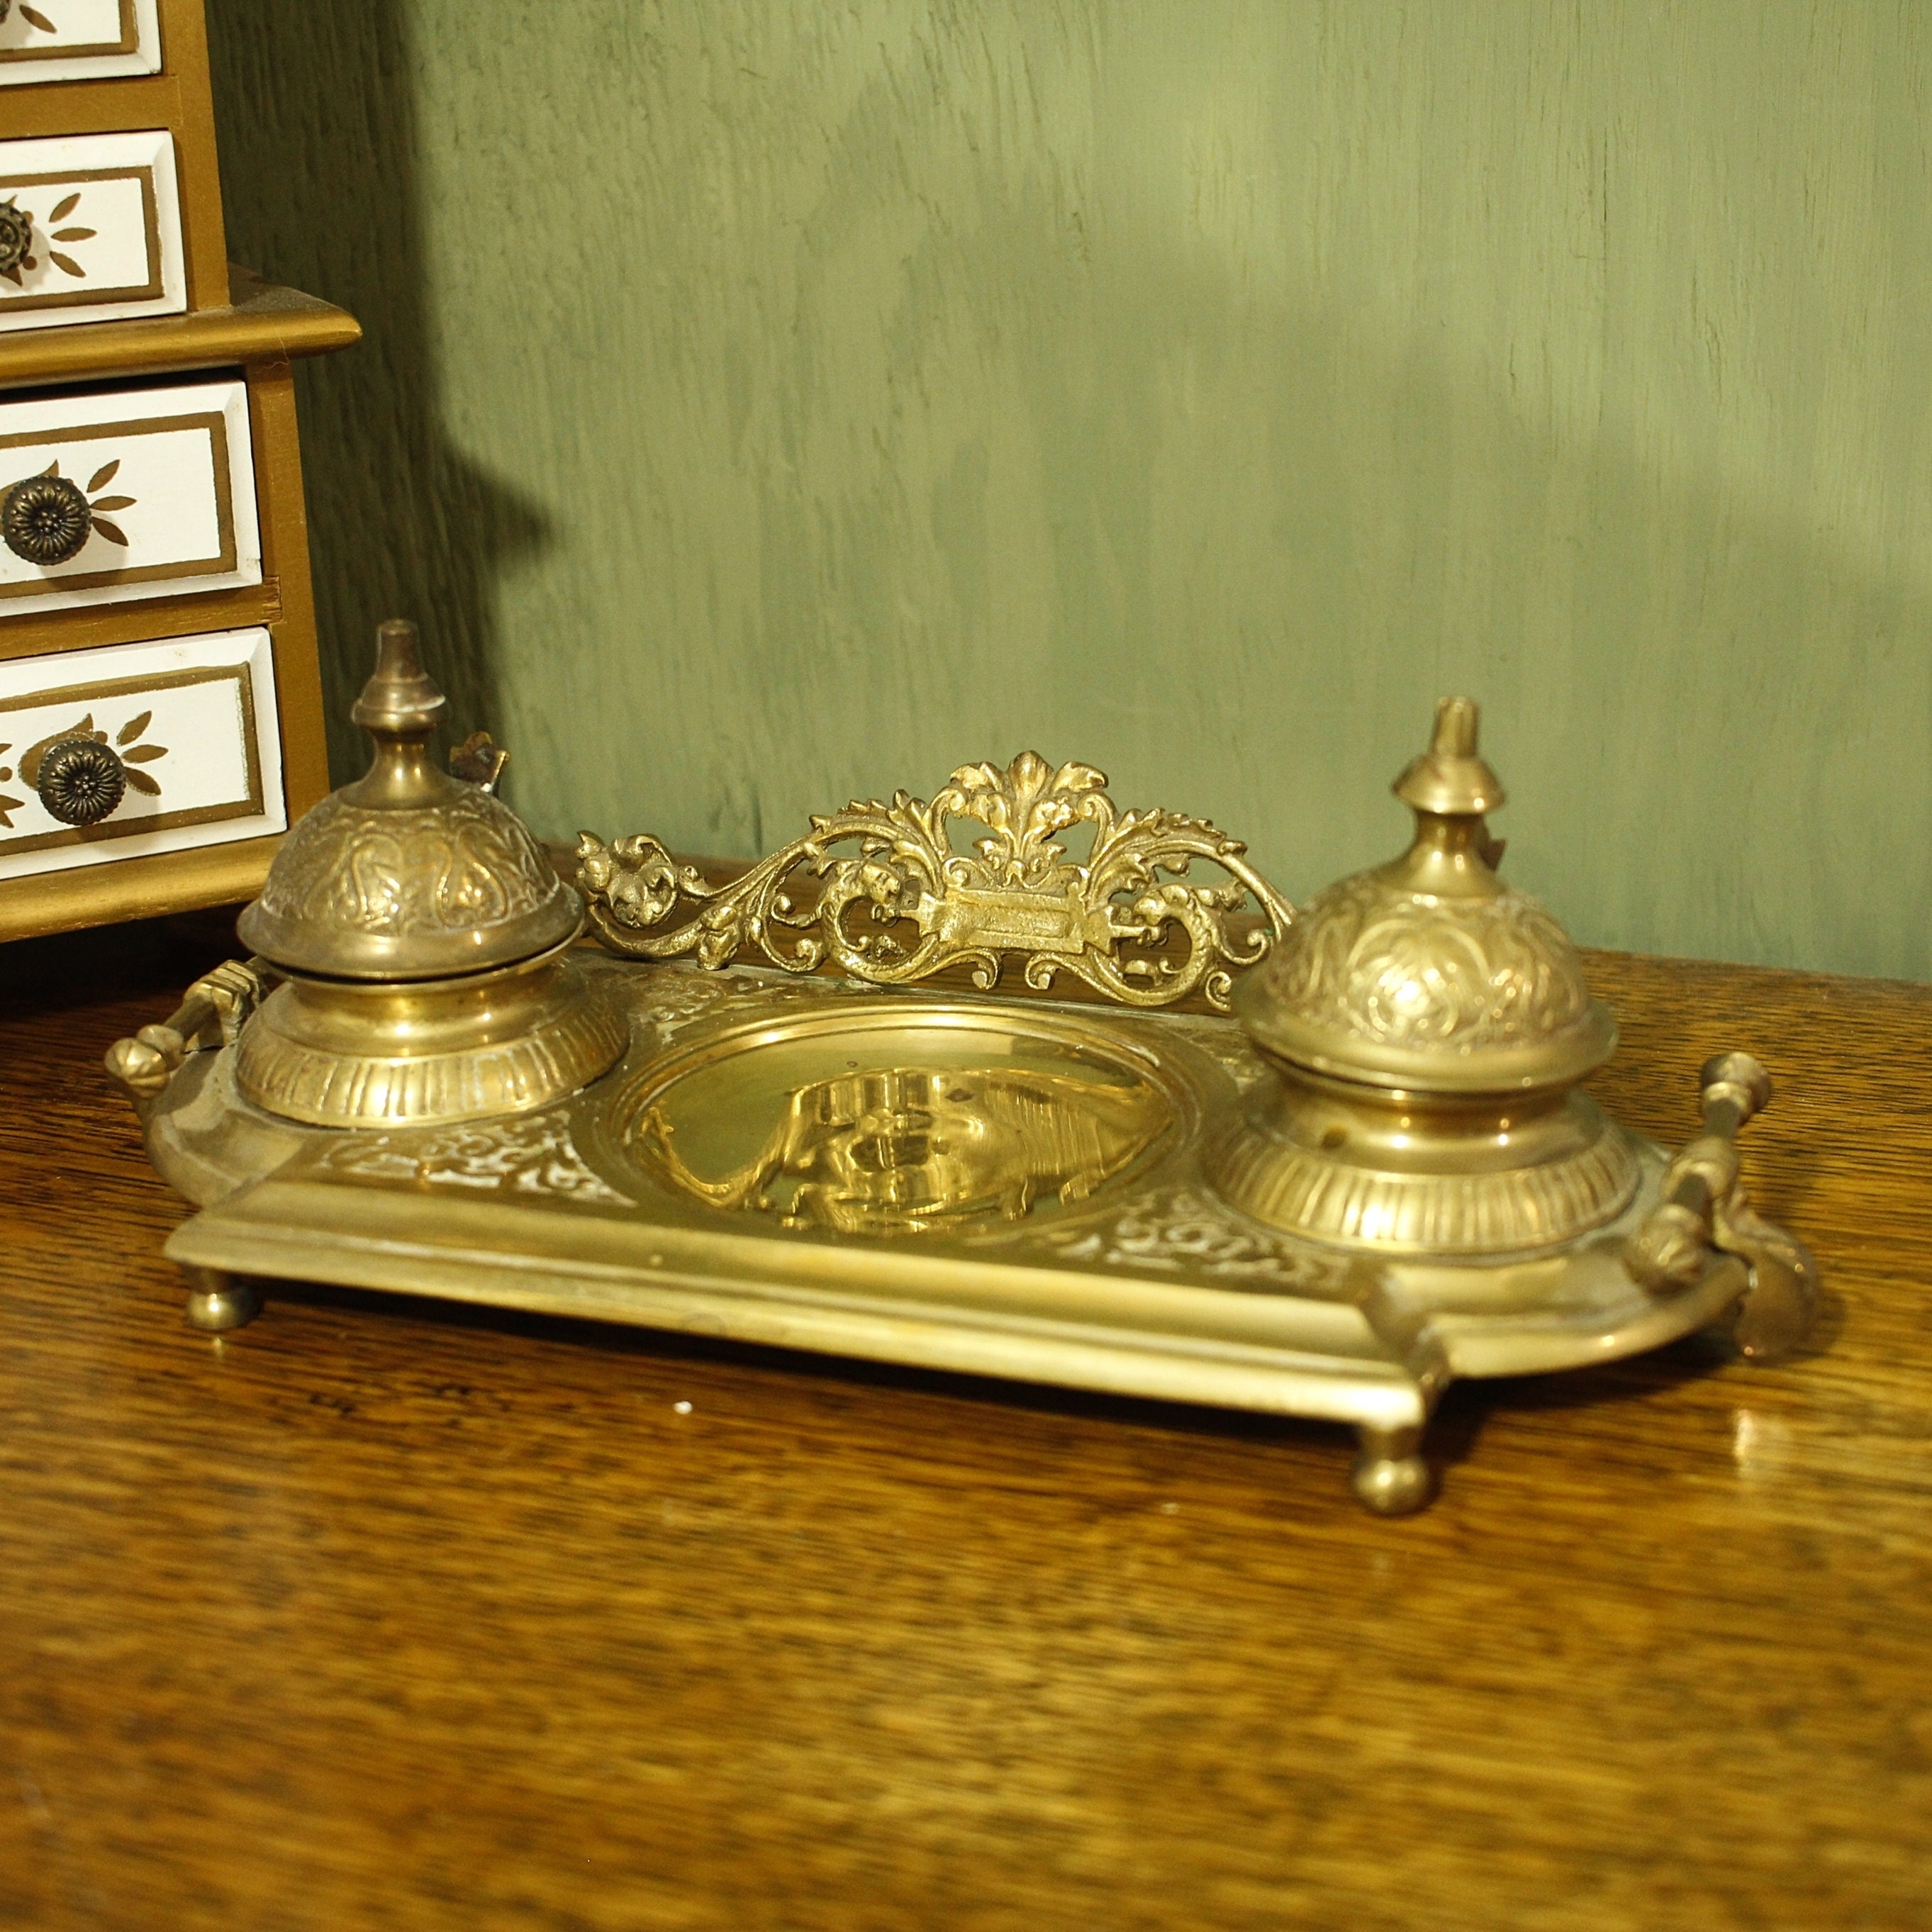 Teleflora Brass Inkwell With Pen in Original Box/ Office Desk Ornate/ Made  in Taiwan 